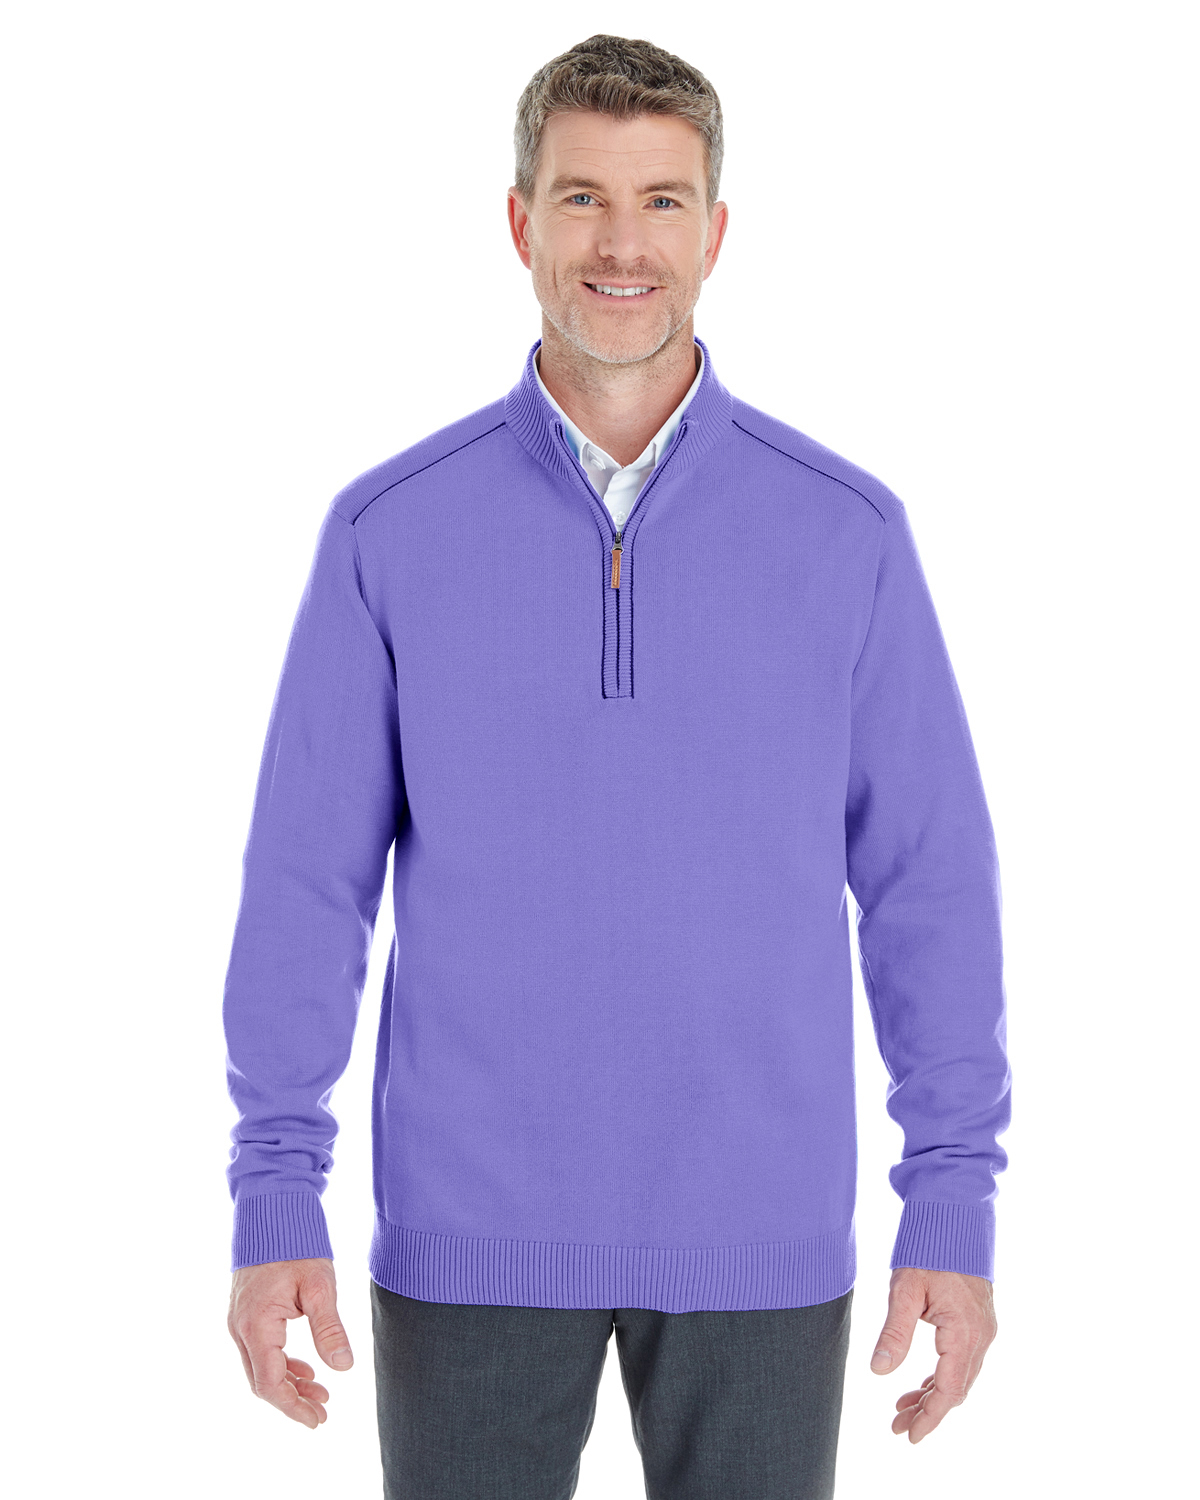 click to view GRAPE/ NAVY